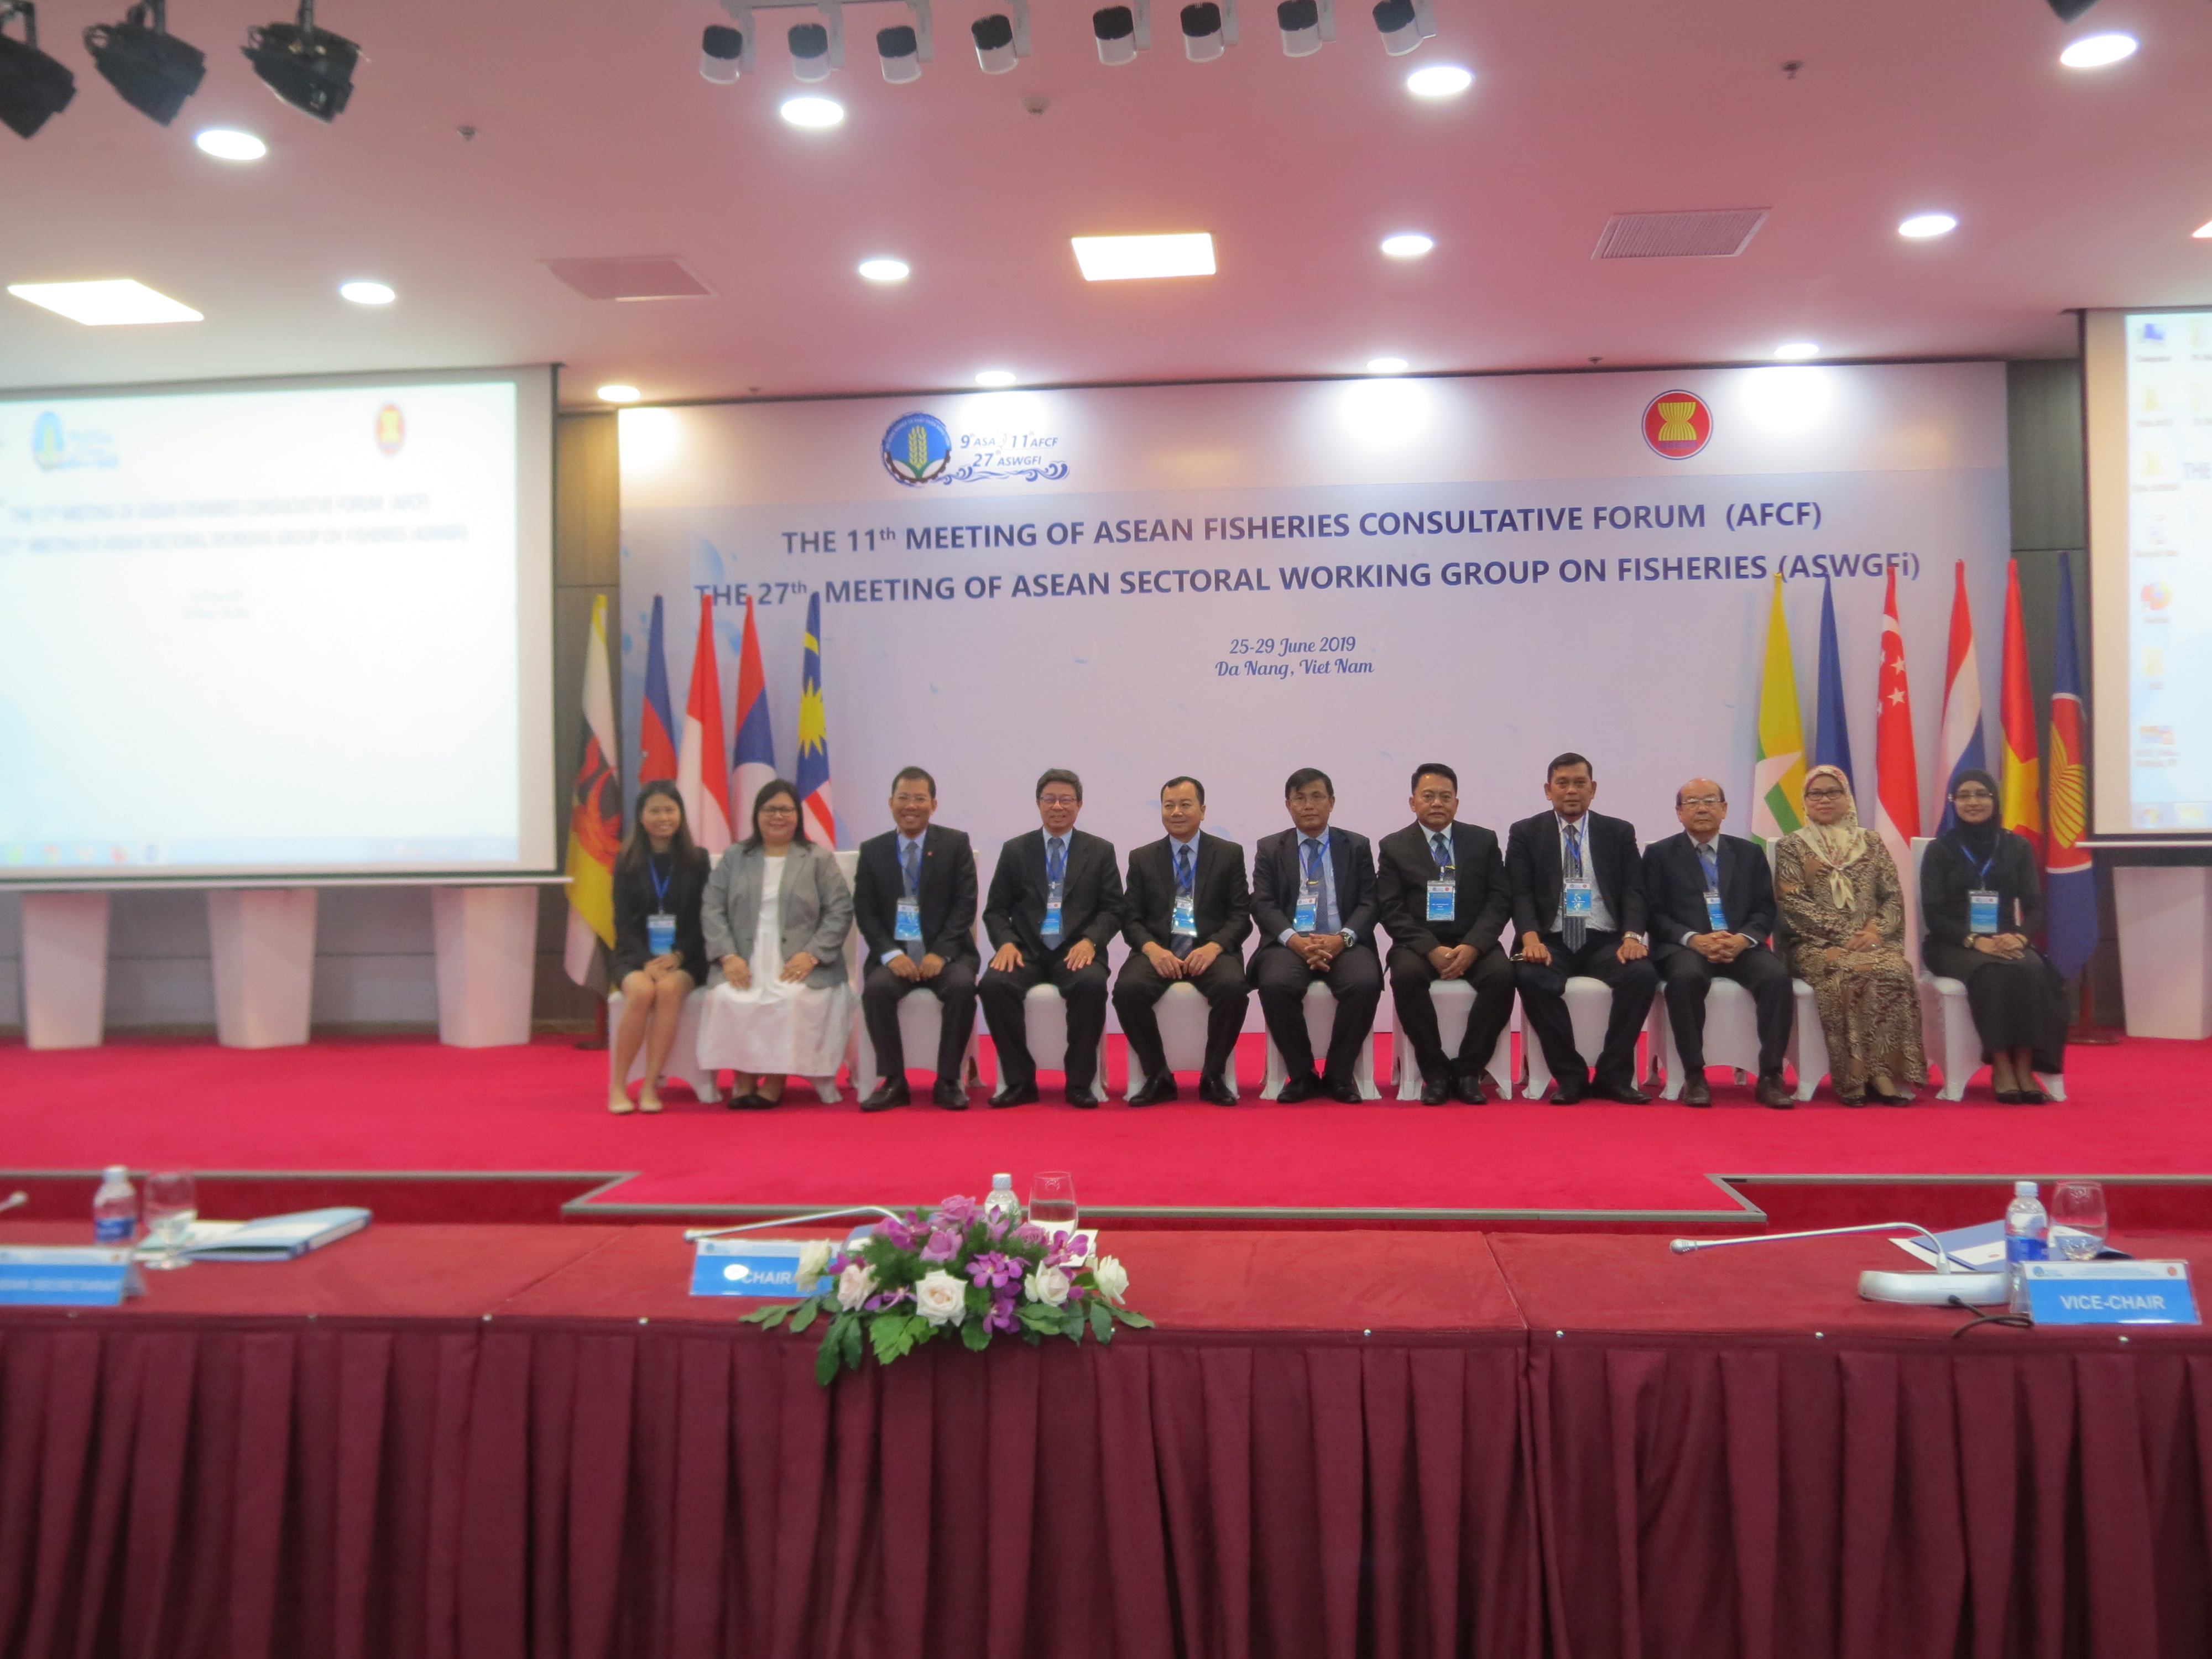 The 11th ASEAN Fisheries Consultative Forum (AFCF)